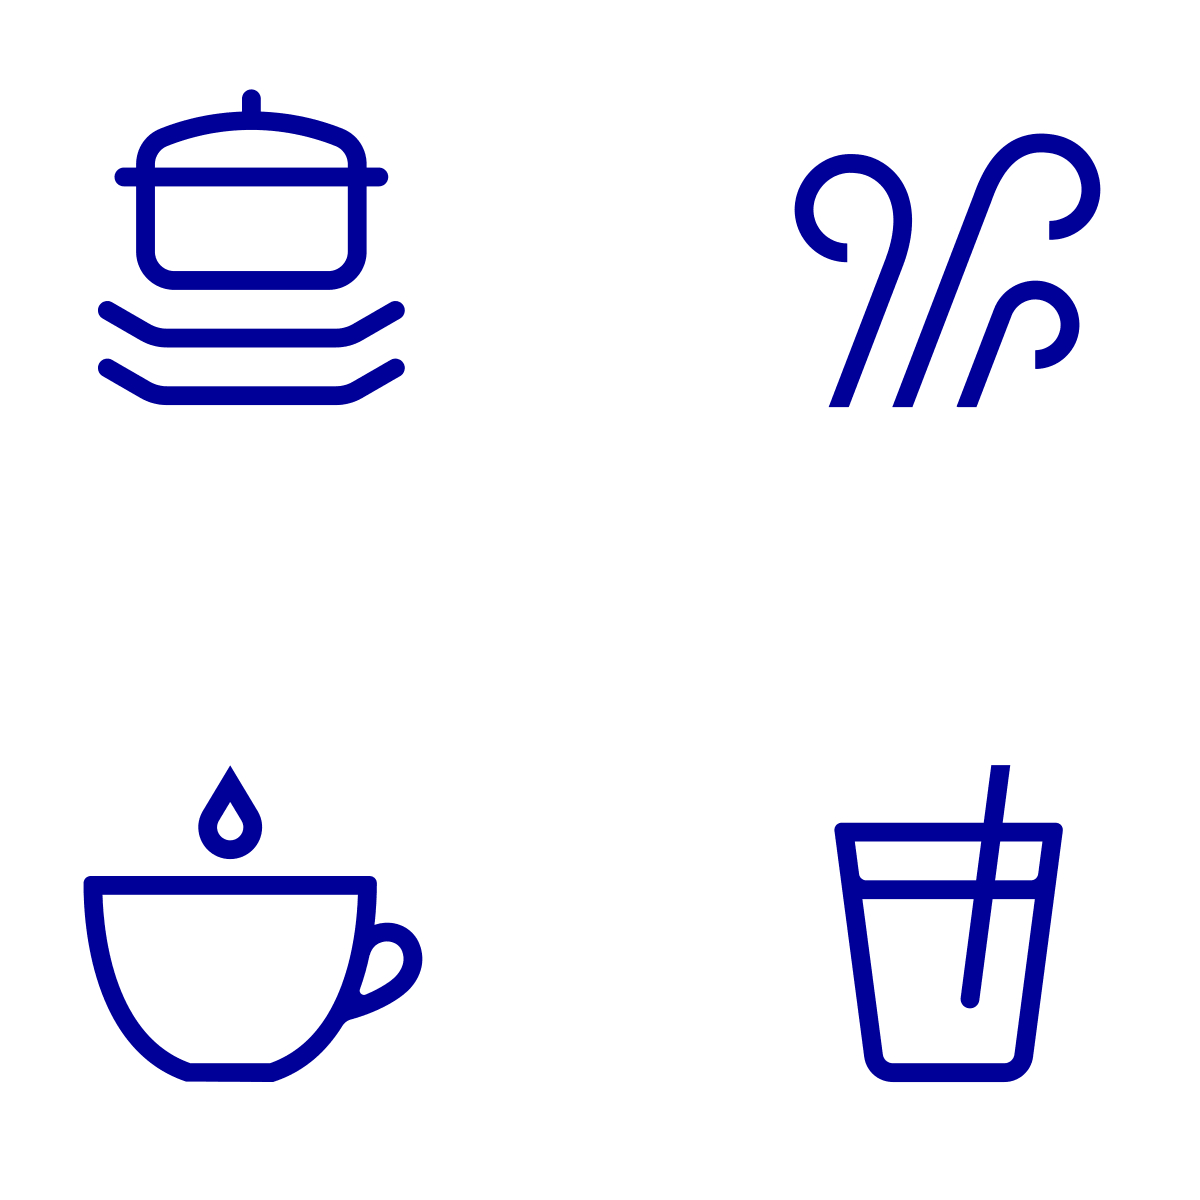 A selection of icons I designed for Electrolux which brought more warmth and humanity to the set of symbols.